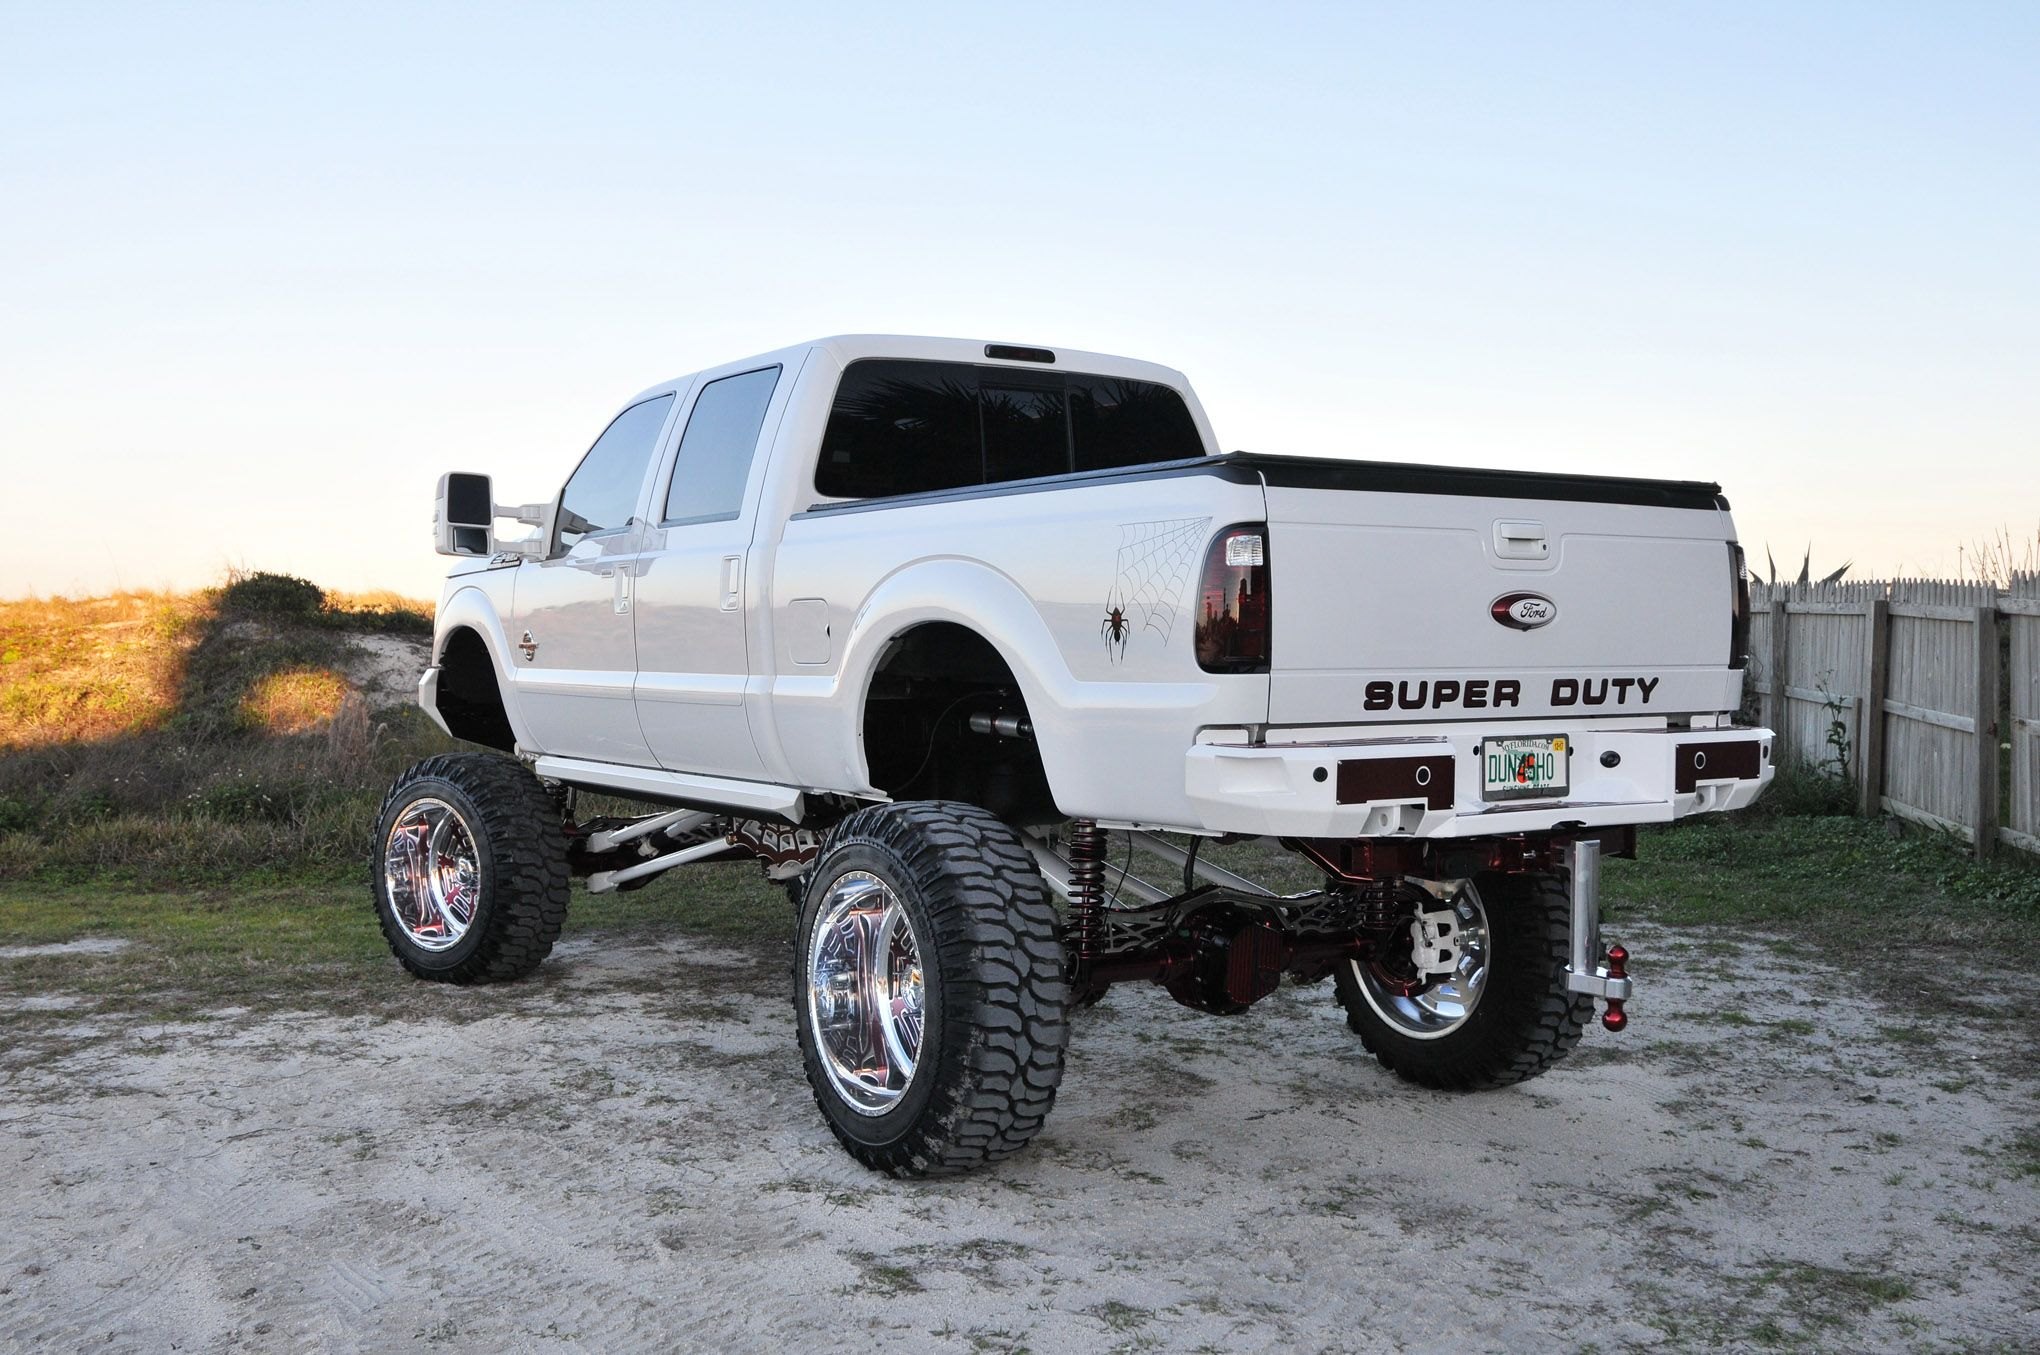 White Lifted Ford Superduty with Off-road Rear Bumper - Photo by Joe Greeves